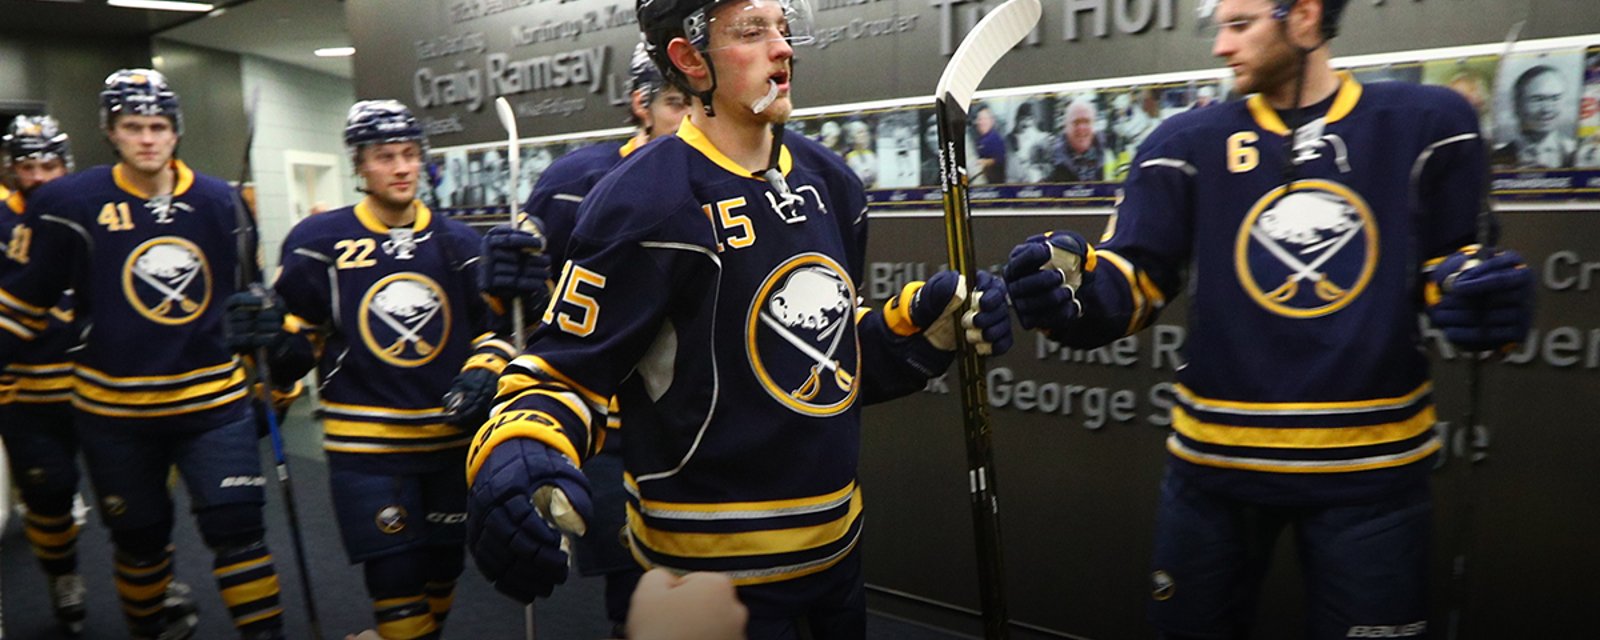 Your Call: Will the Sabres make the playoffs in 2017-18?